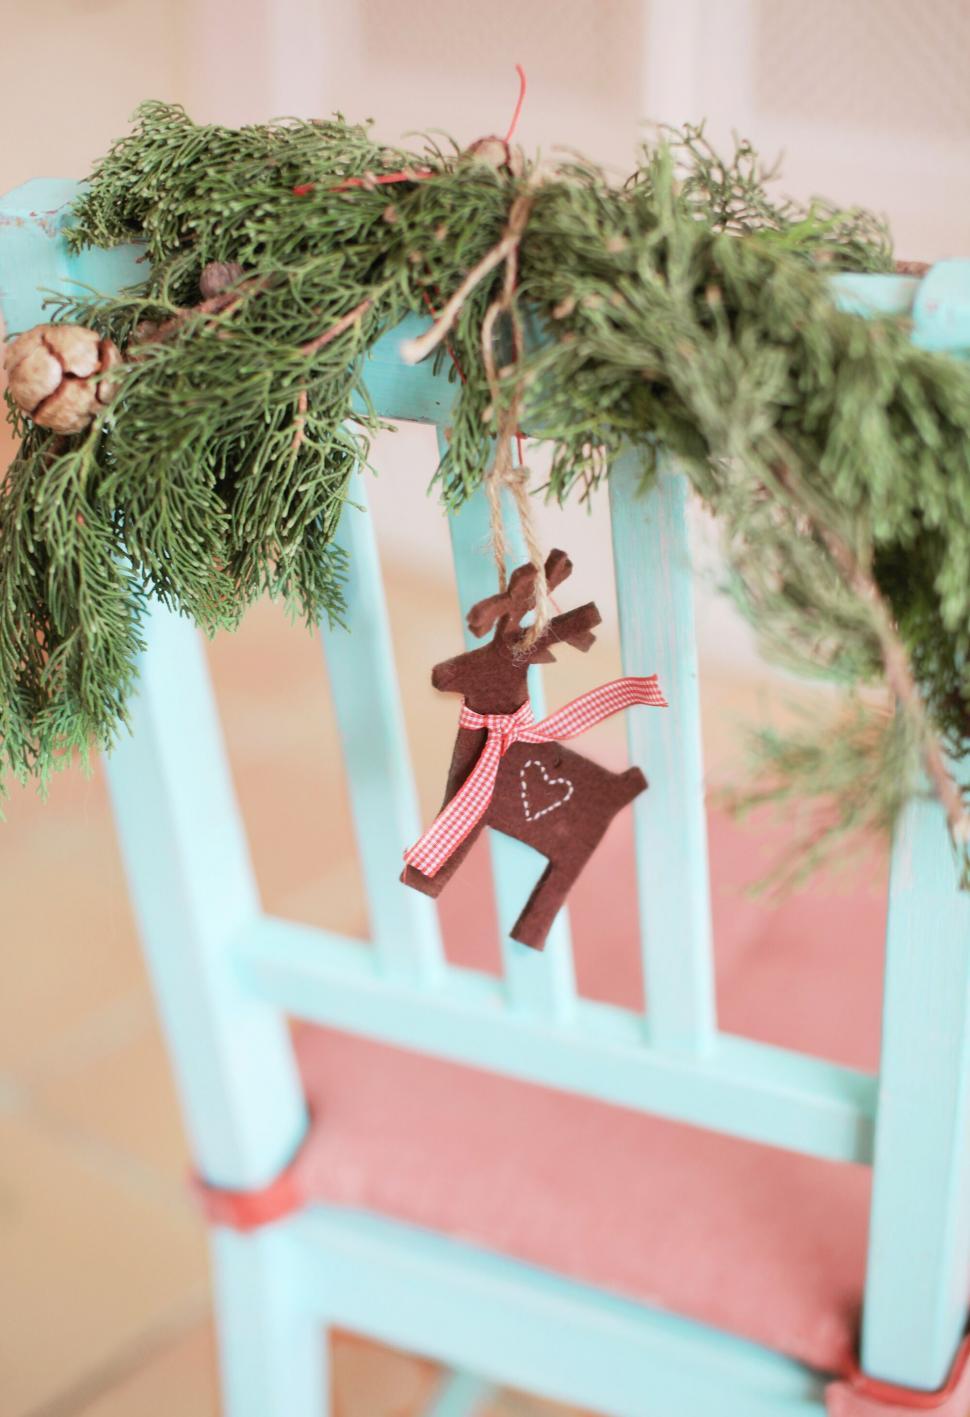 Free Image of Rustic reindeer decoration on a turquoise chair 